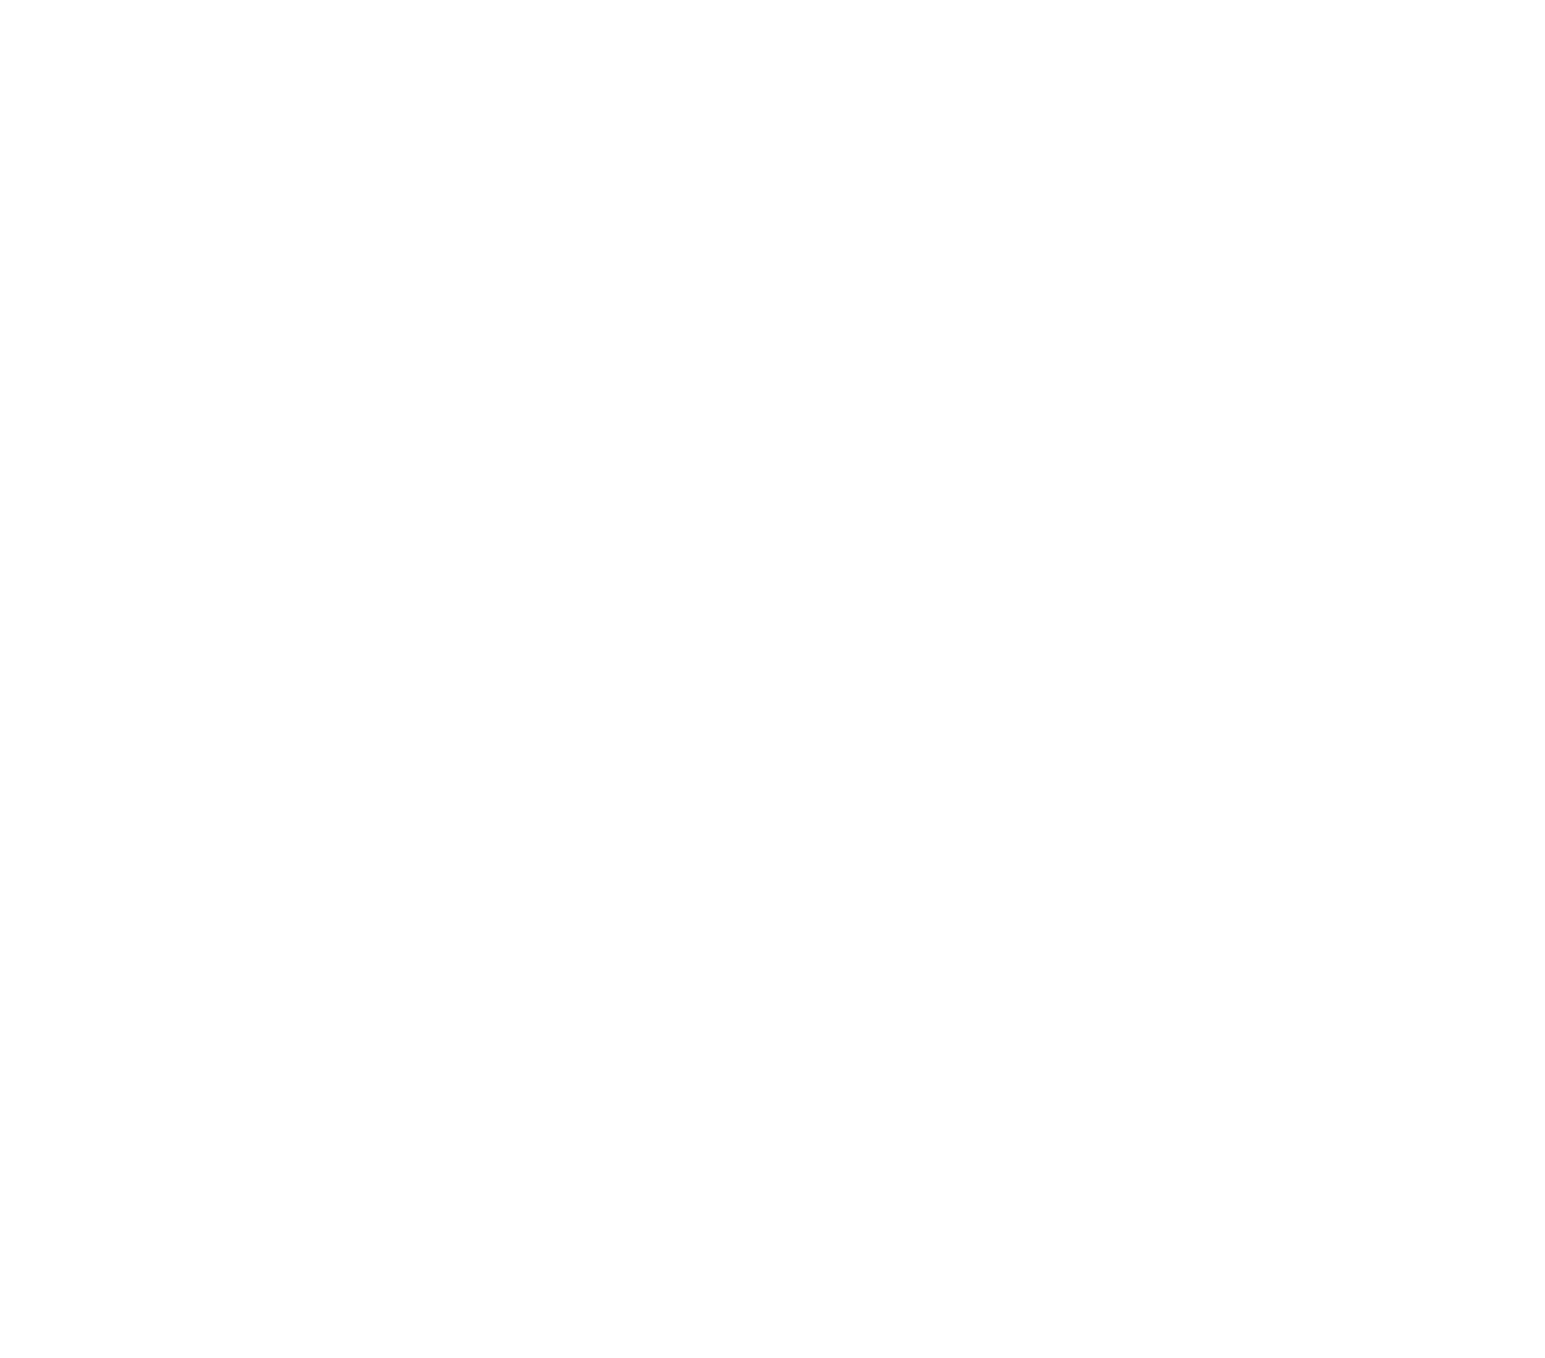 Quanex Building Products logo for dark backgrounds (transparent PNG)